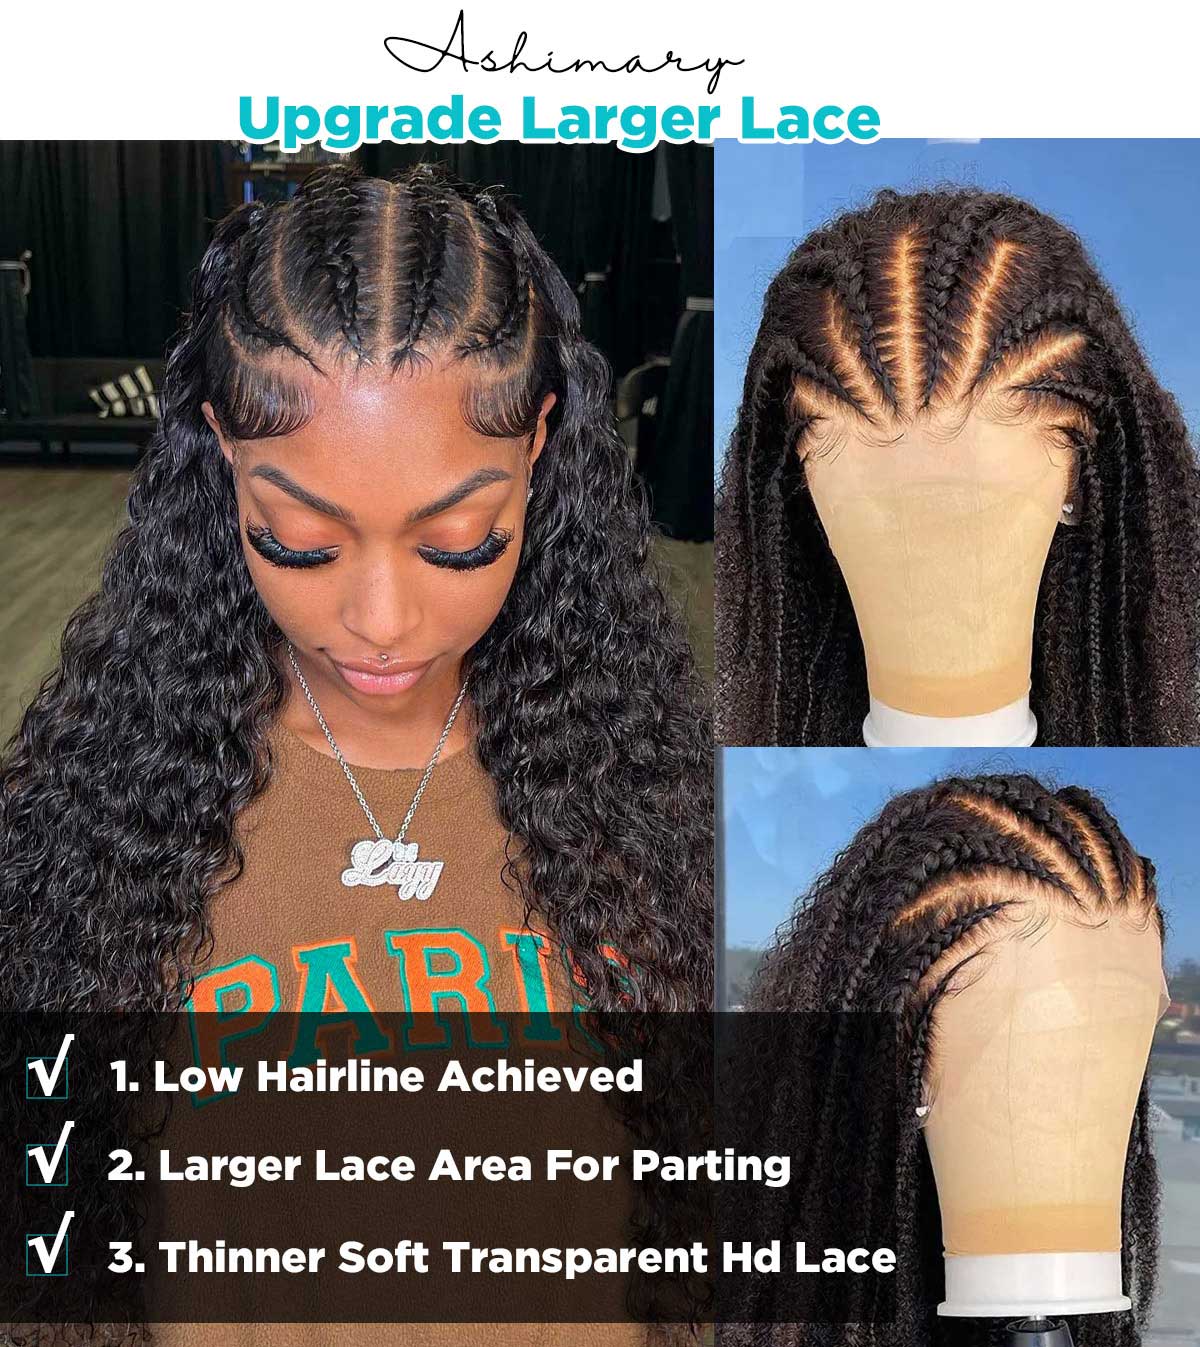 upgrade larger lace